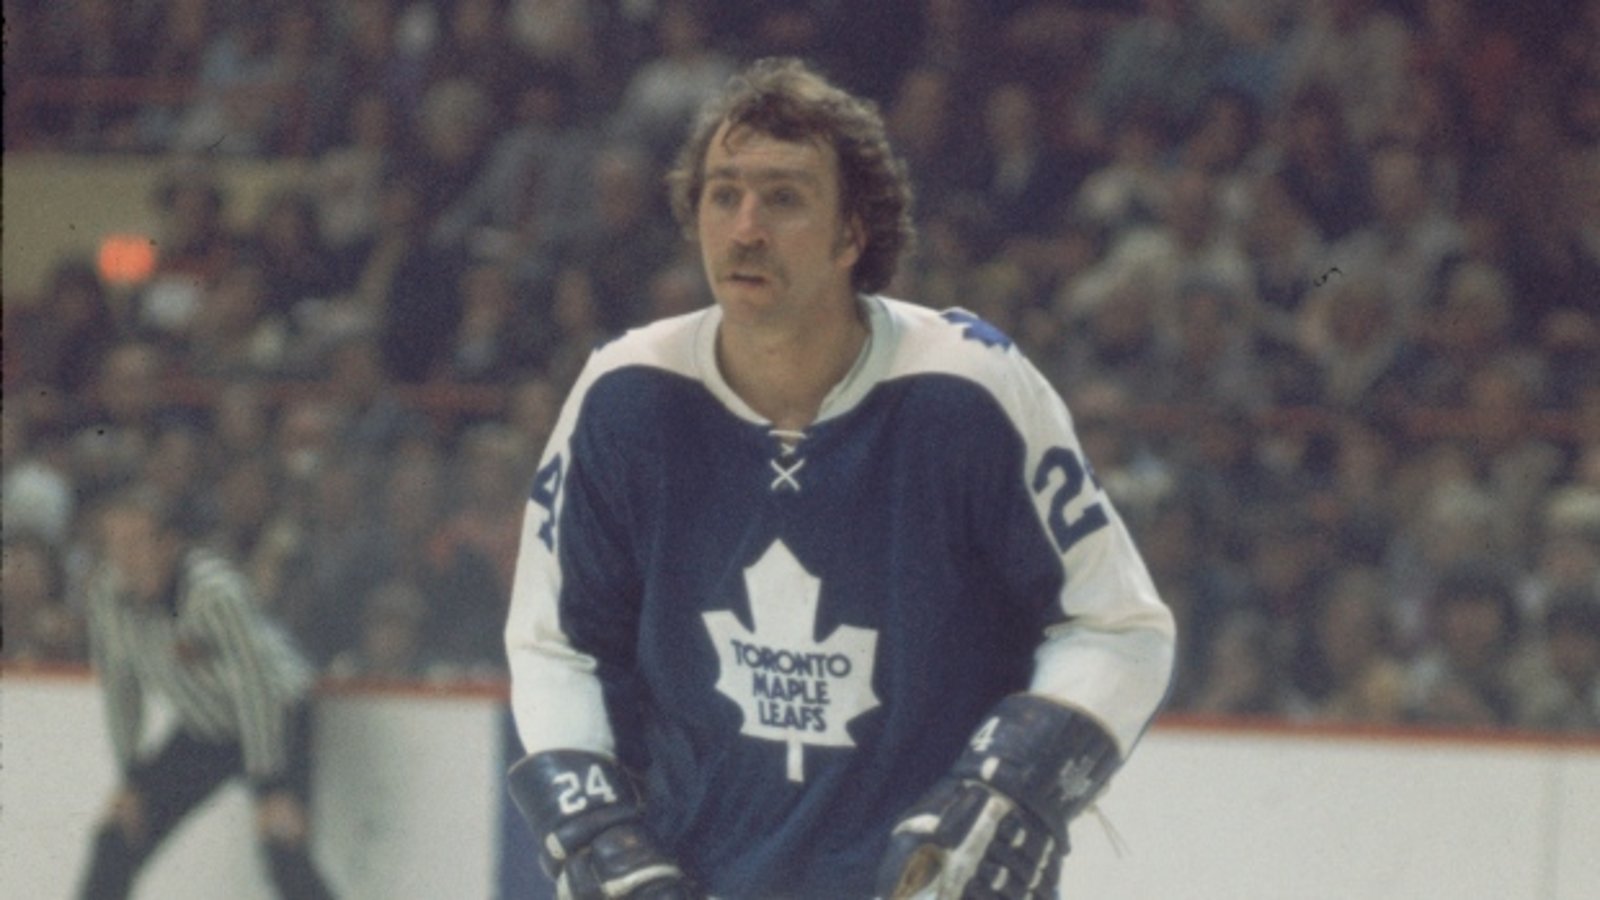 Master of hip checks and former Maple Leaf Glennie passes away 